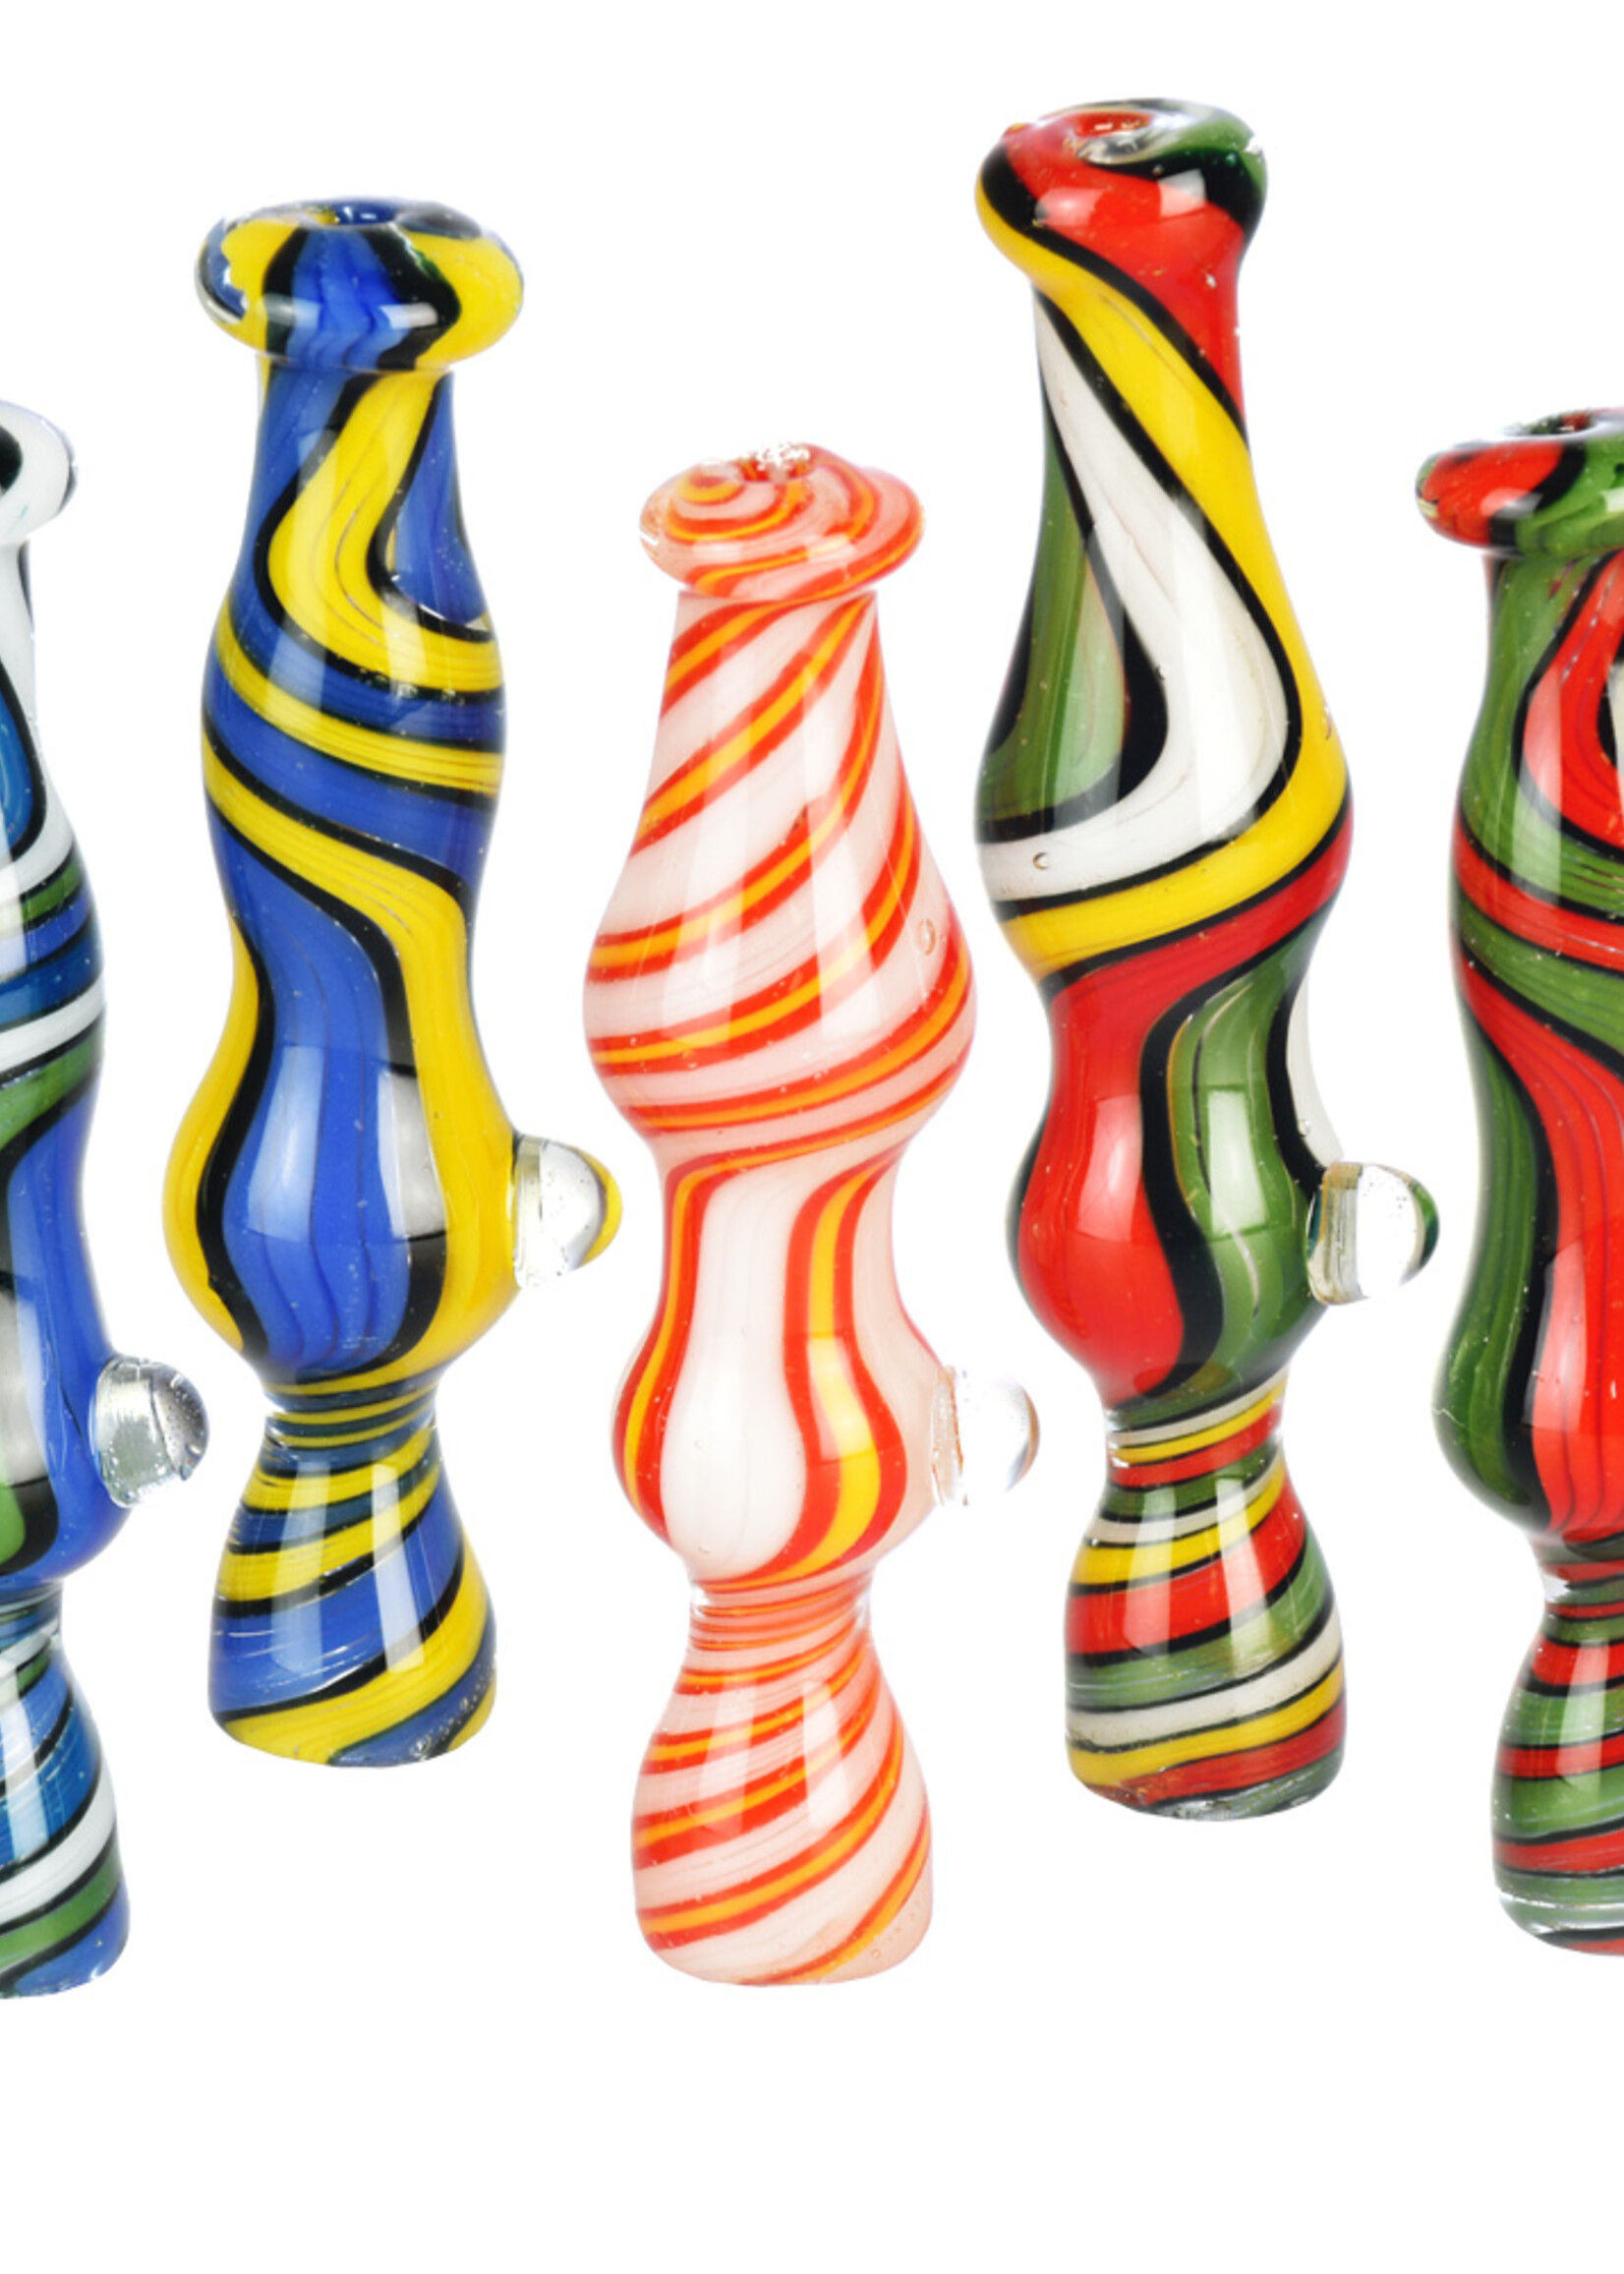 Dancing Colors Wig Wag Glass Chillum | 3.75" | Colors Vary - #3793